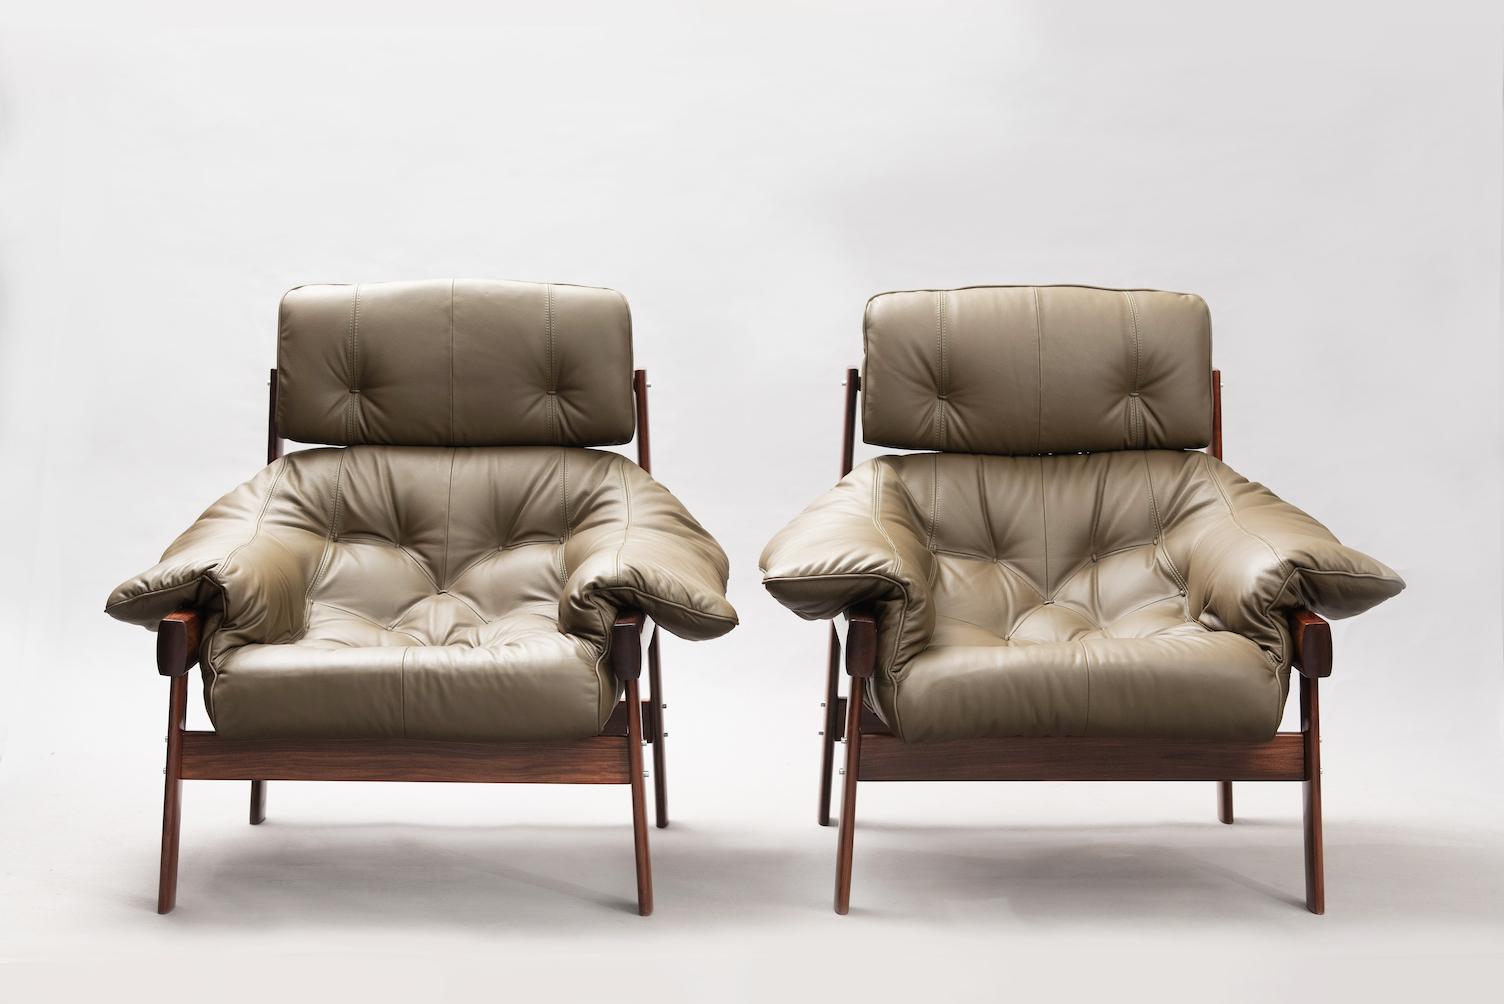 Pair of hardwood Percival Lafer high back lounge chairs reupholstered in olive green leather.
Note: Missing in the photos the leather straps for one chair and the wood pins, but they are already totally completed.